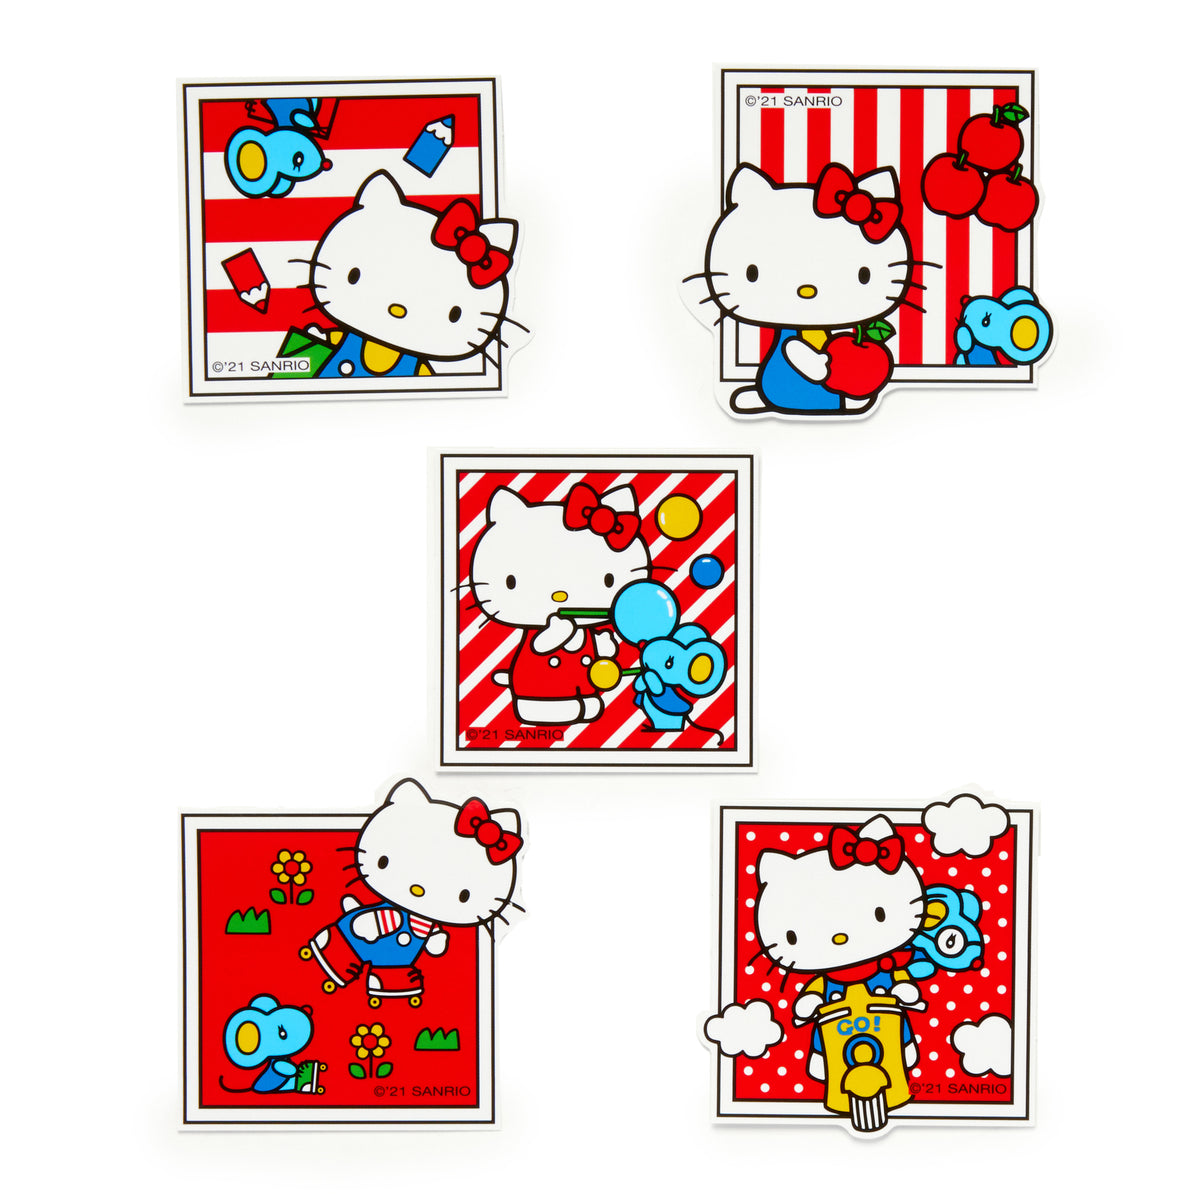 Sanrio Characters Photo Big Stickers Pack Pompompurin